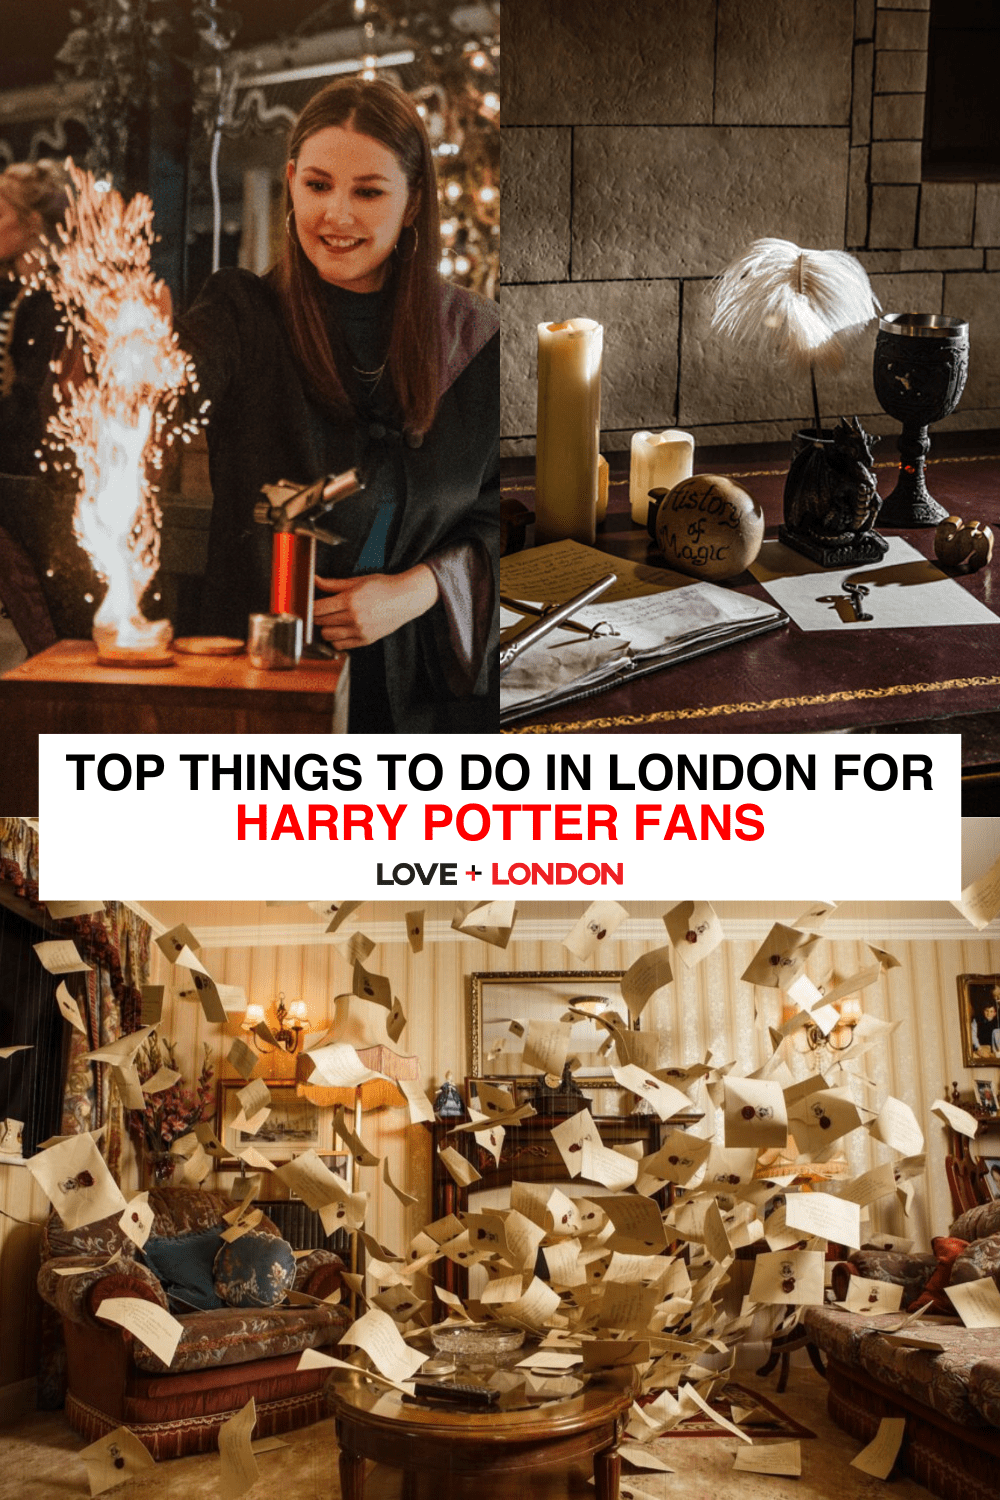 Top Things to Do in London for Harry Potter Fans